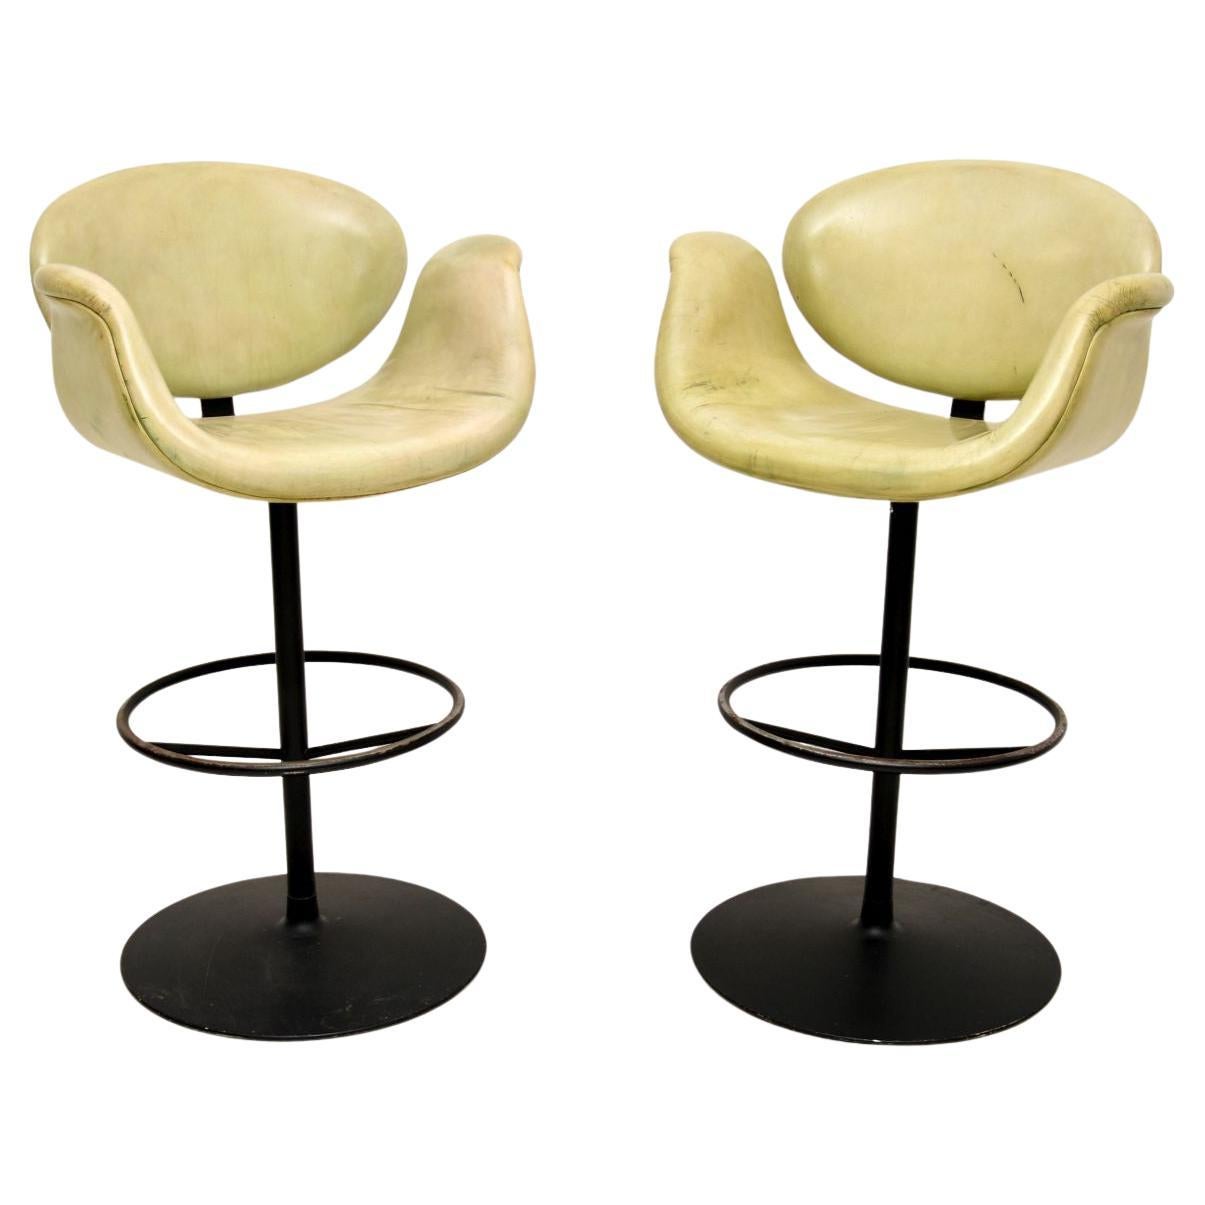 Pair of Vintage Leather Tulip Bar Stools by Pierre Paulin